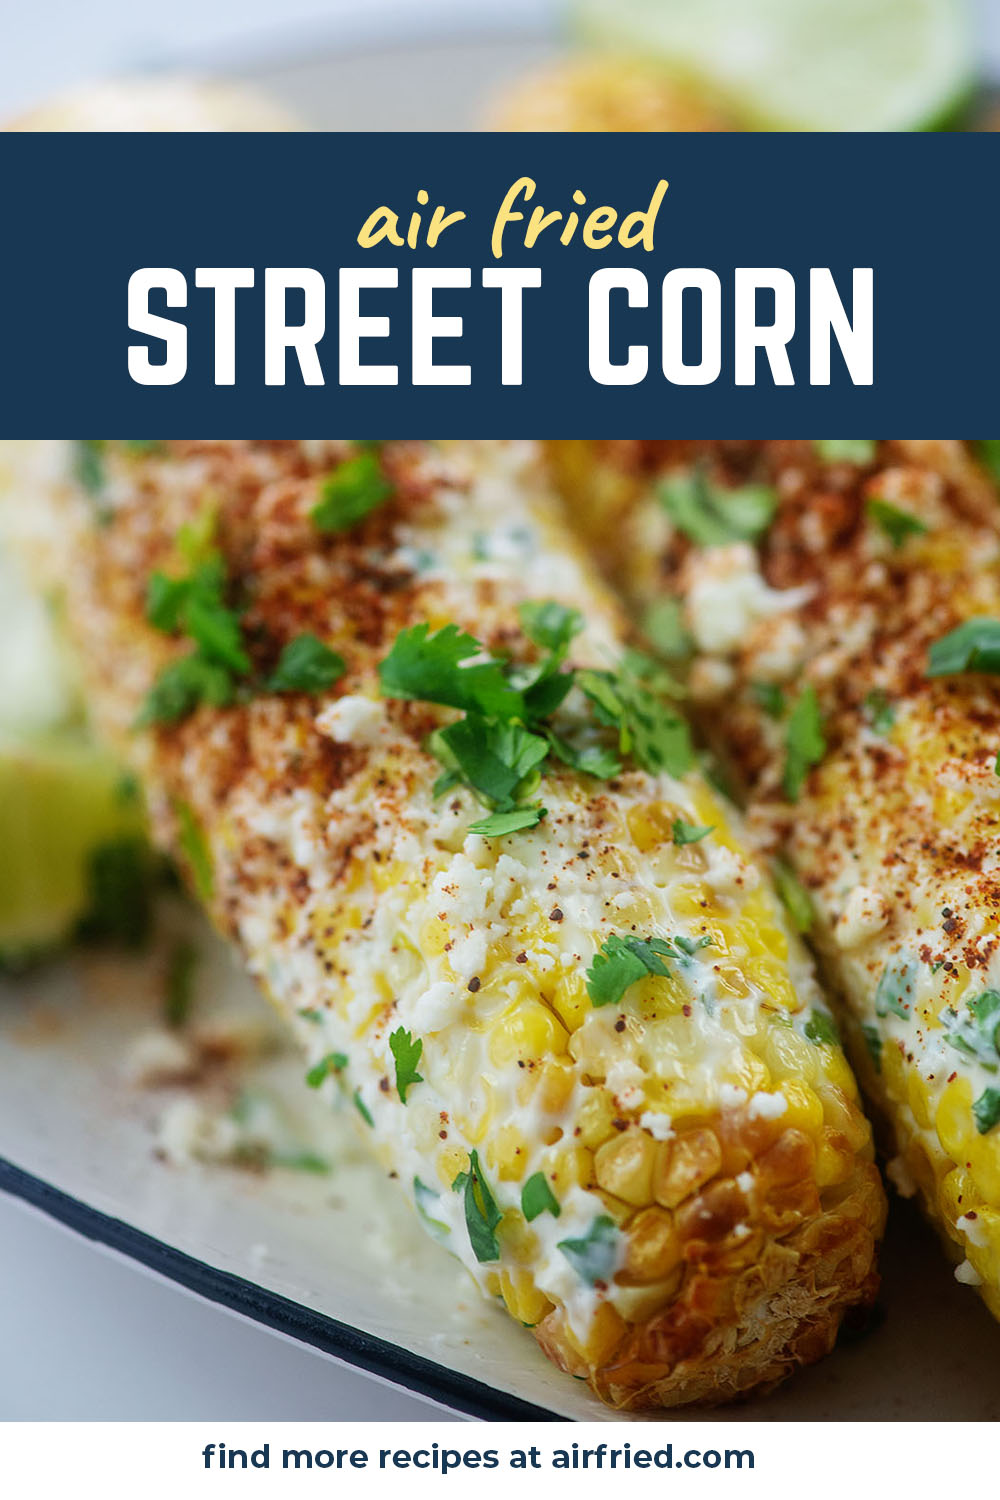 This is a simple street corn recipe using the air fryer and a creamy coating mixed with Mexican-inspired seasonings.